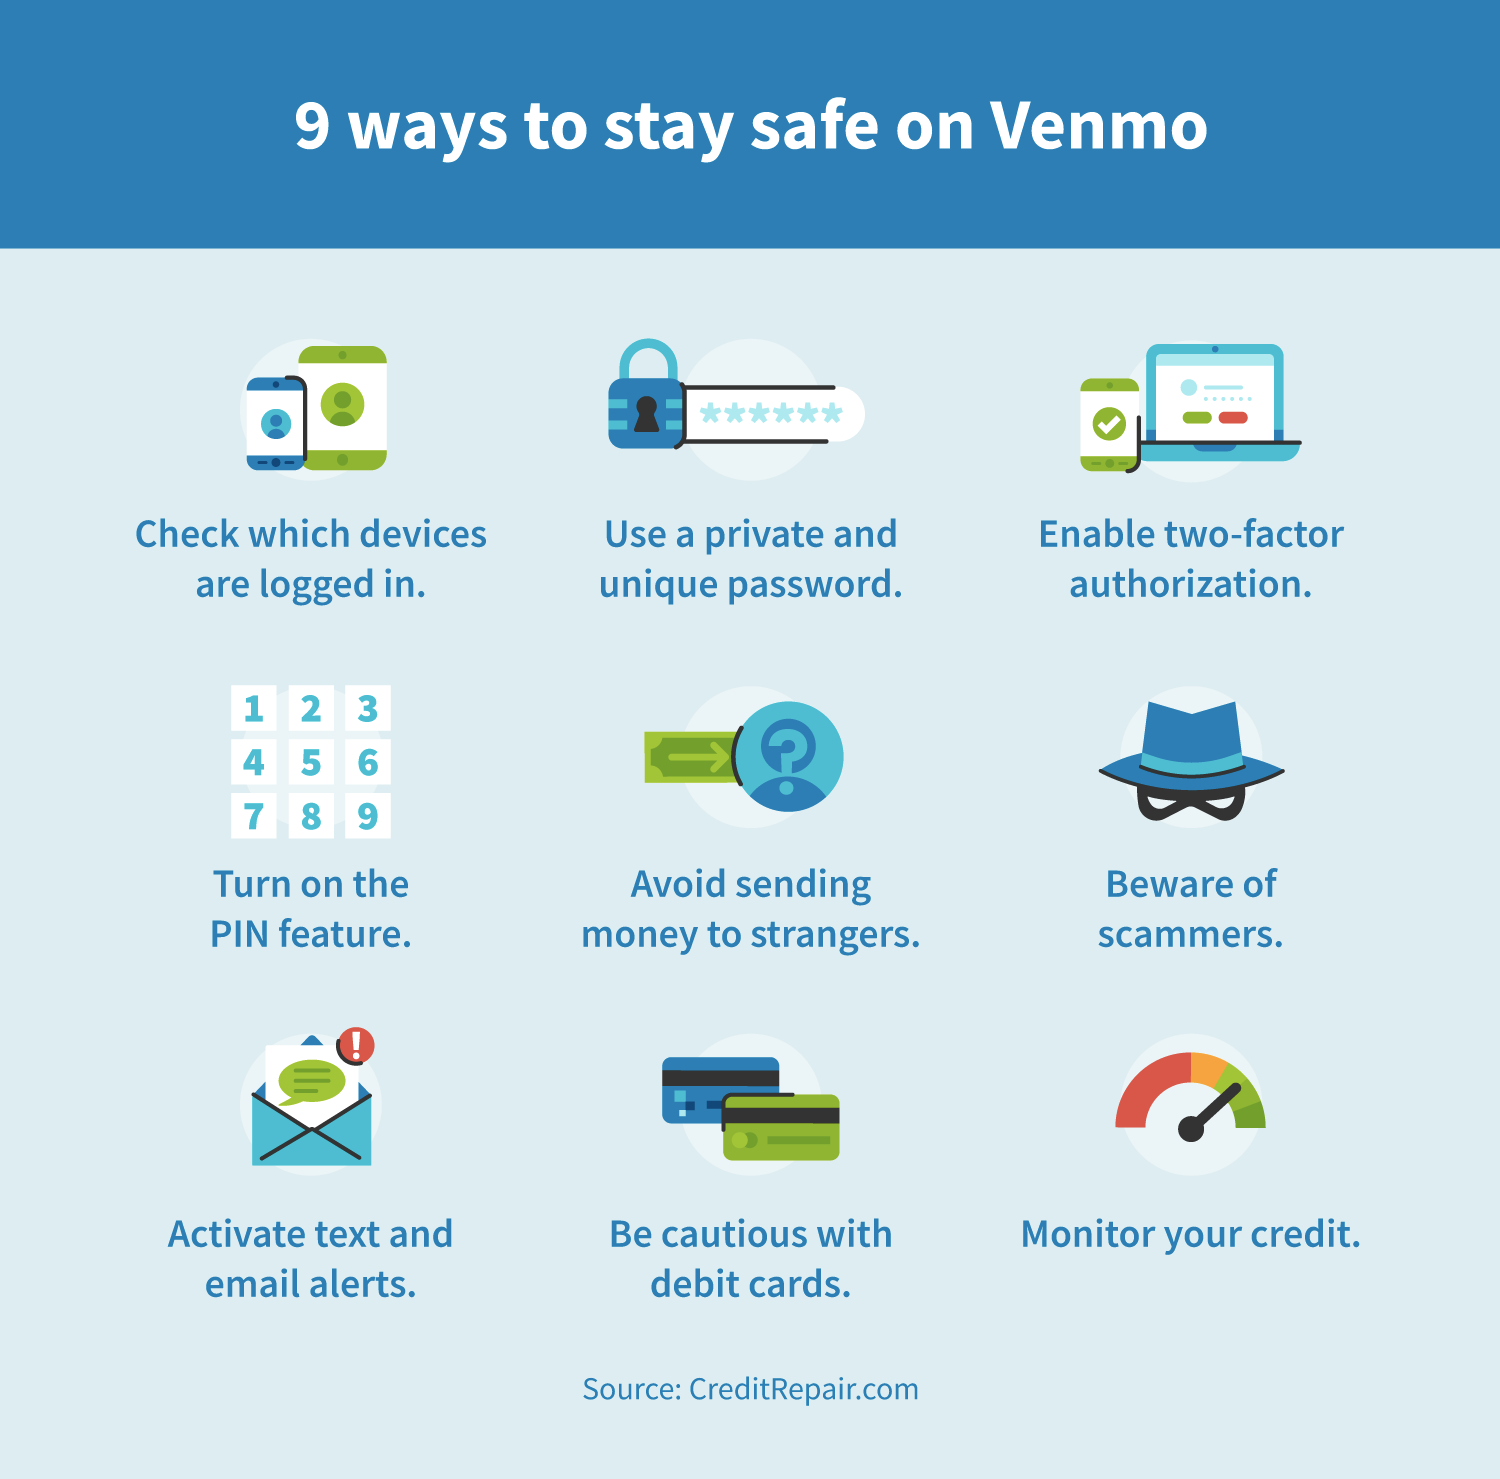 9 ways to stay safe on Venmo